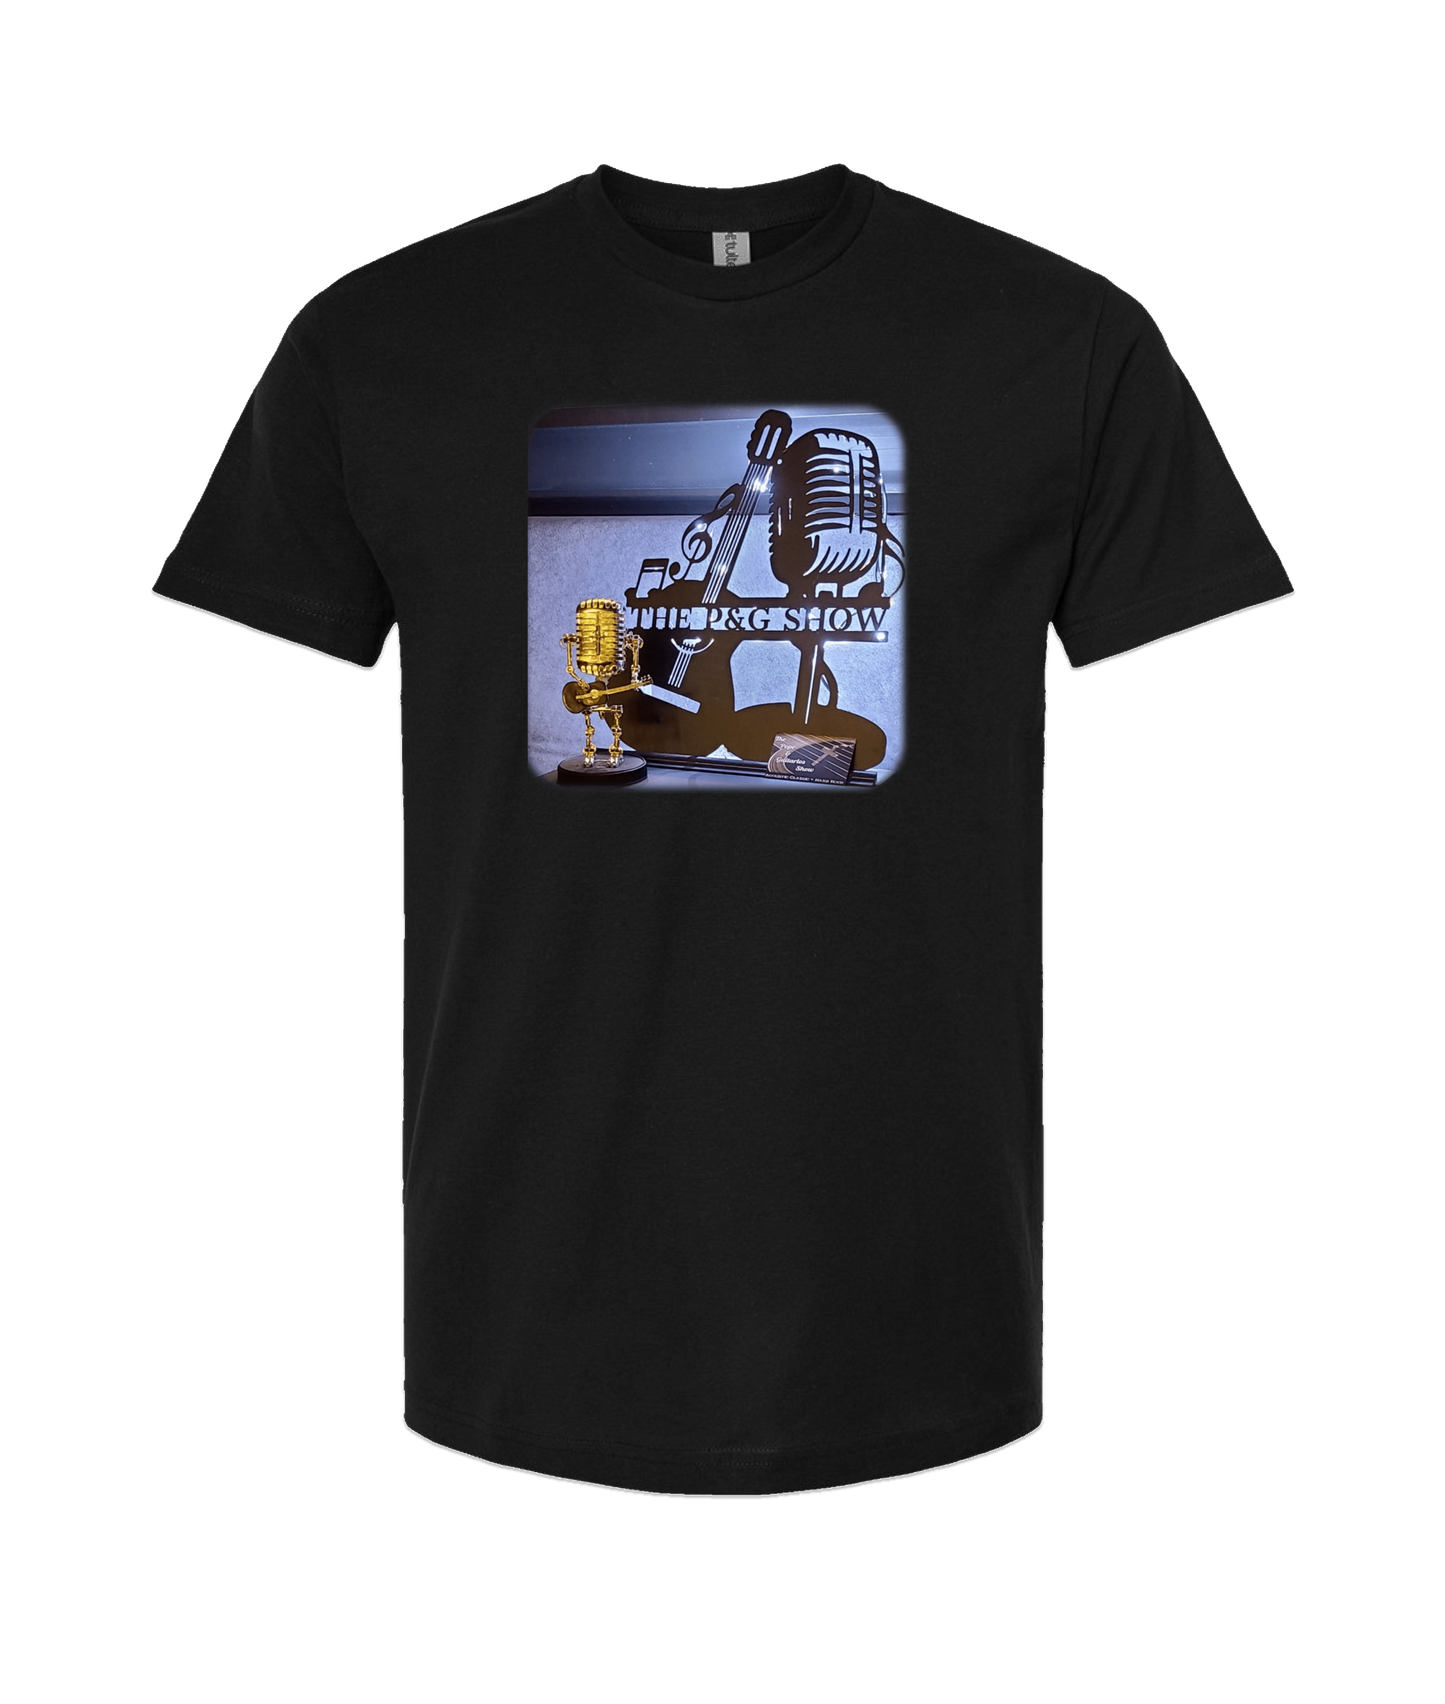 The Pope and Guitarlos Show - Mic Guitar - Black T Shirt